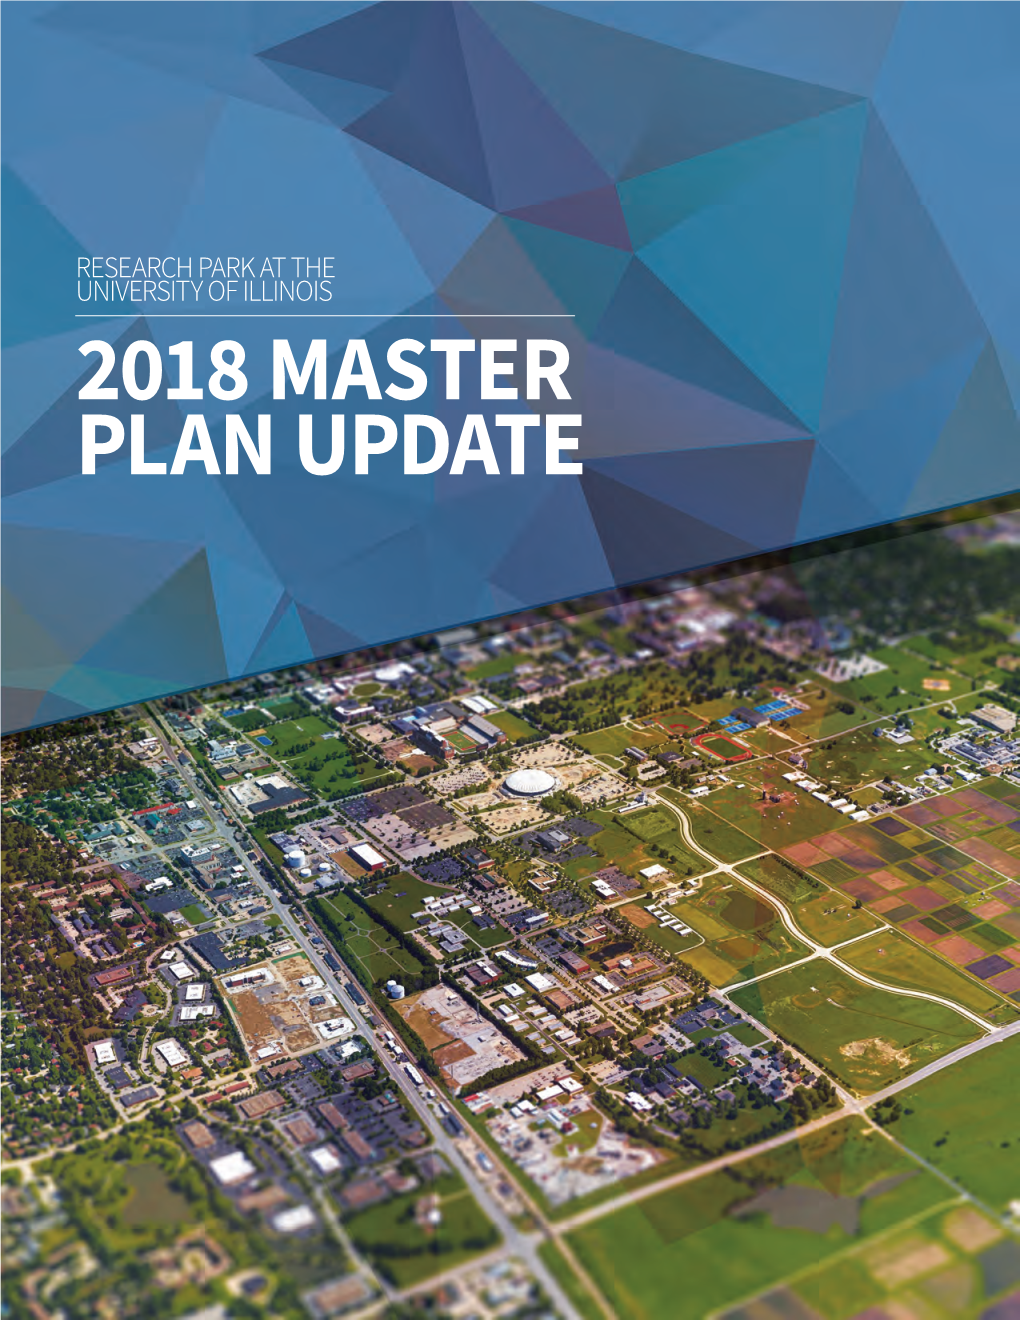 Research Park at the University of Illinois 2018 Master Plan Update 2